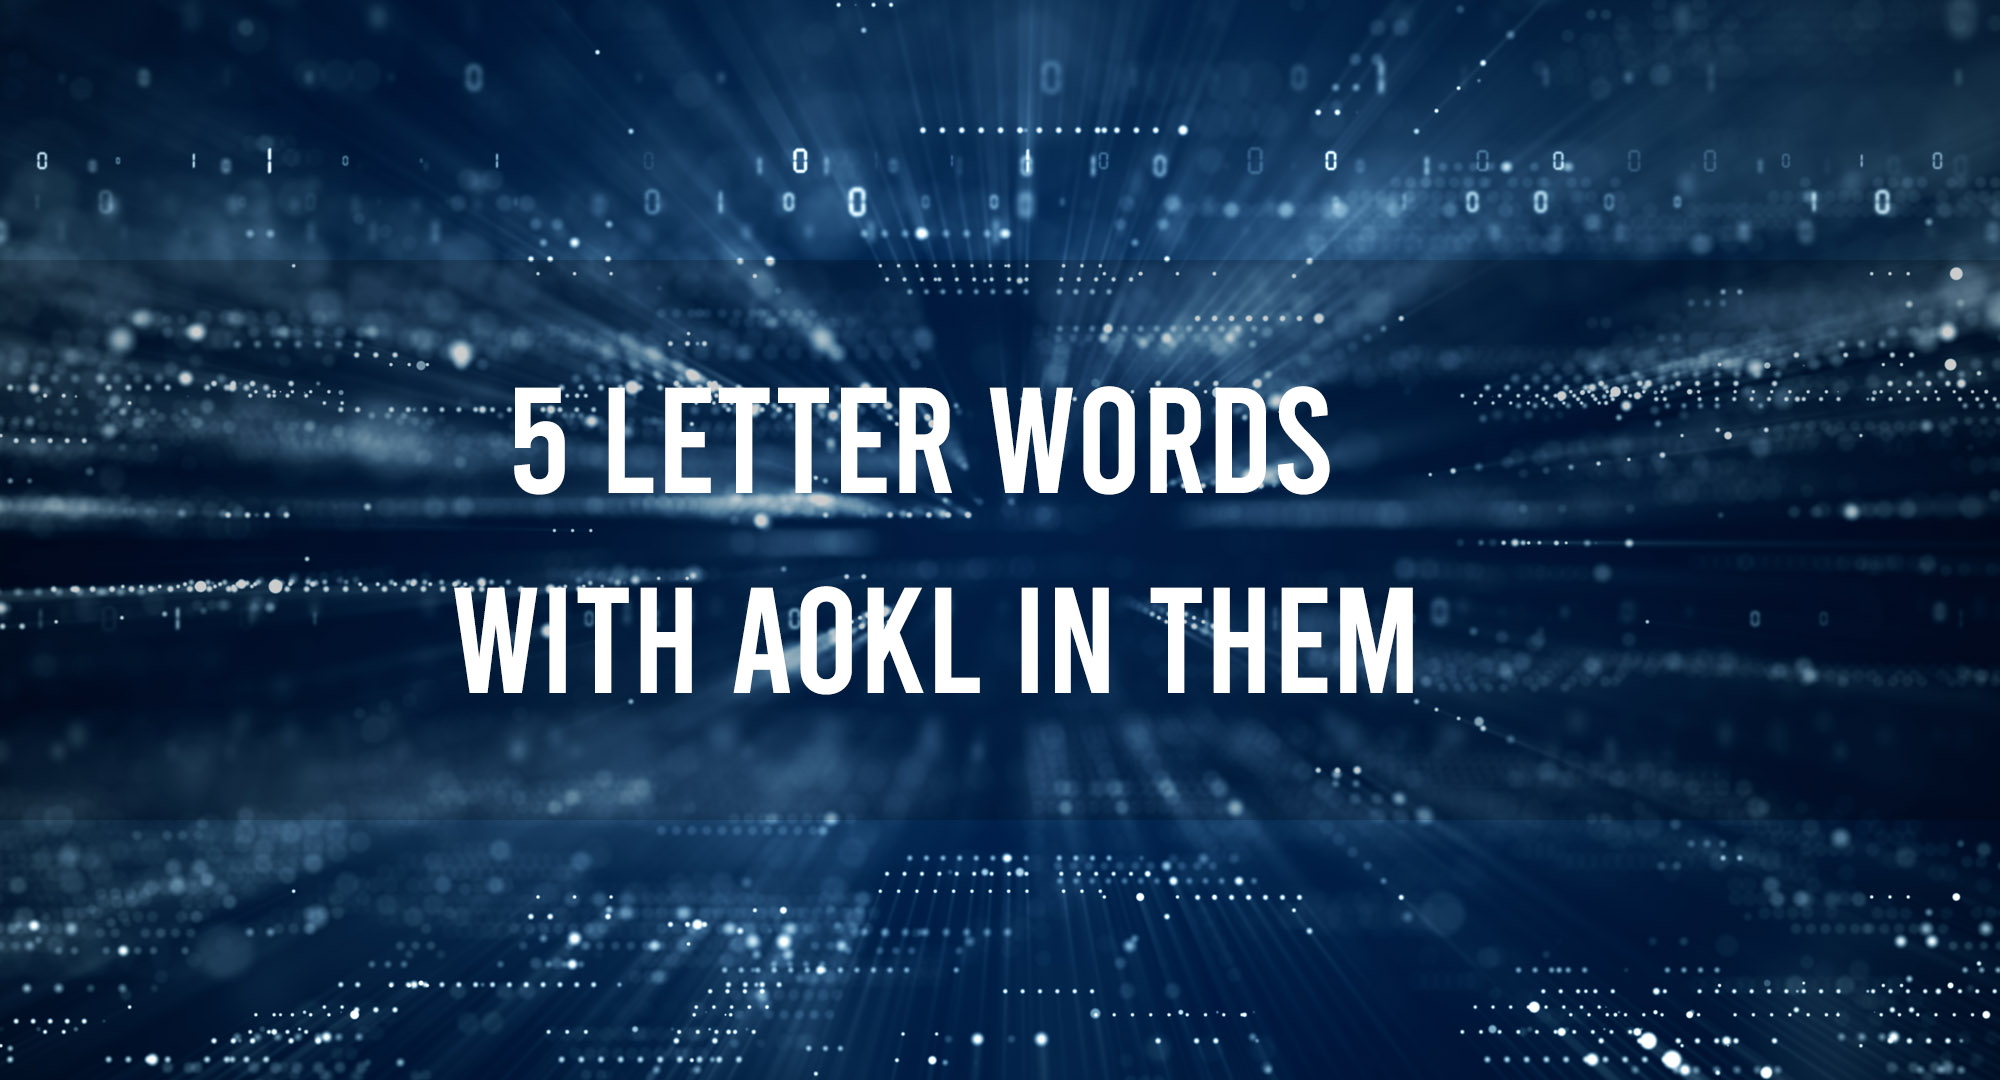 5 Letter Words with AOKL In Them